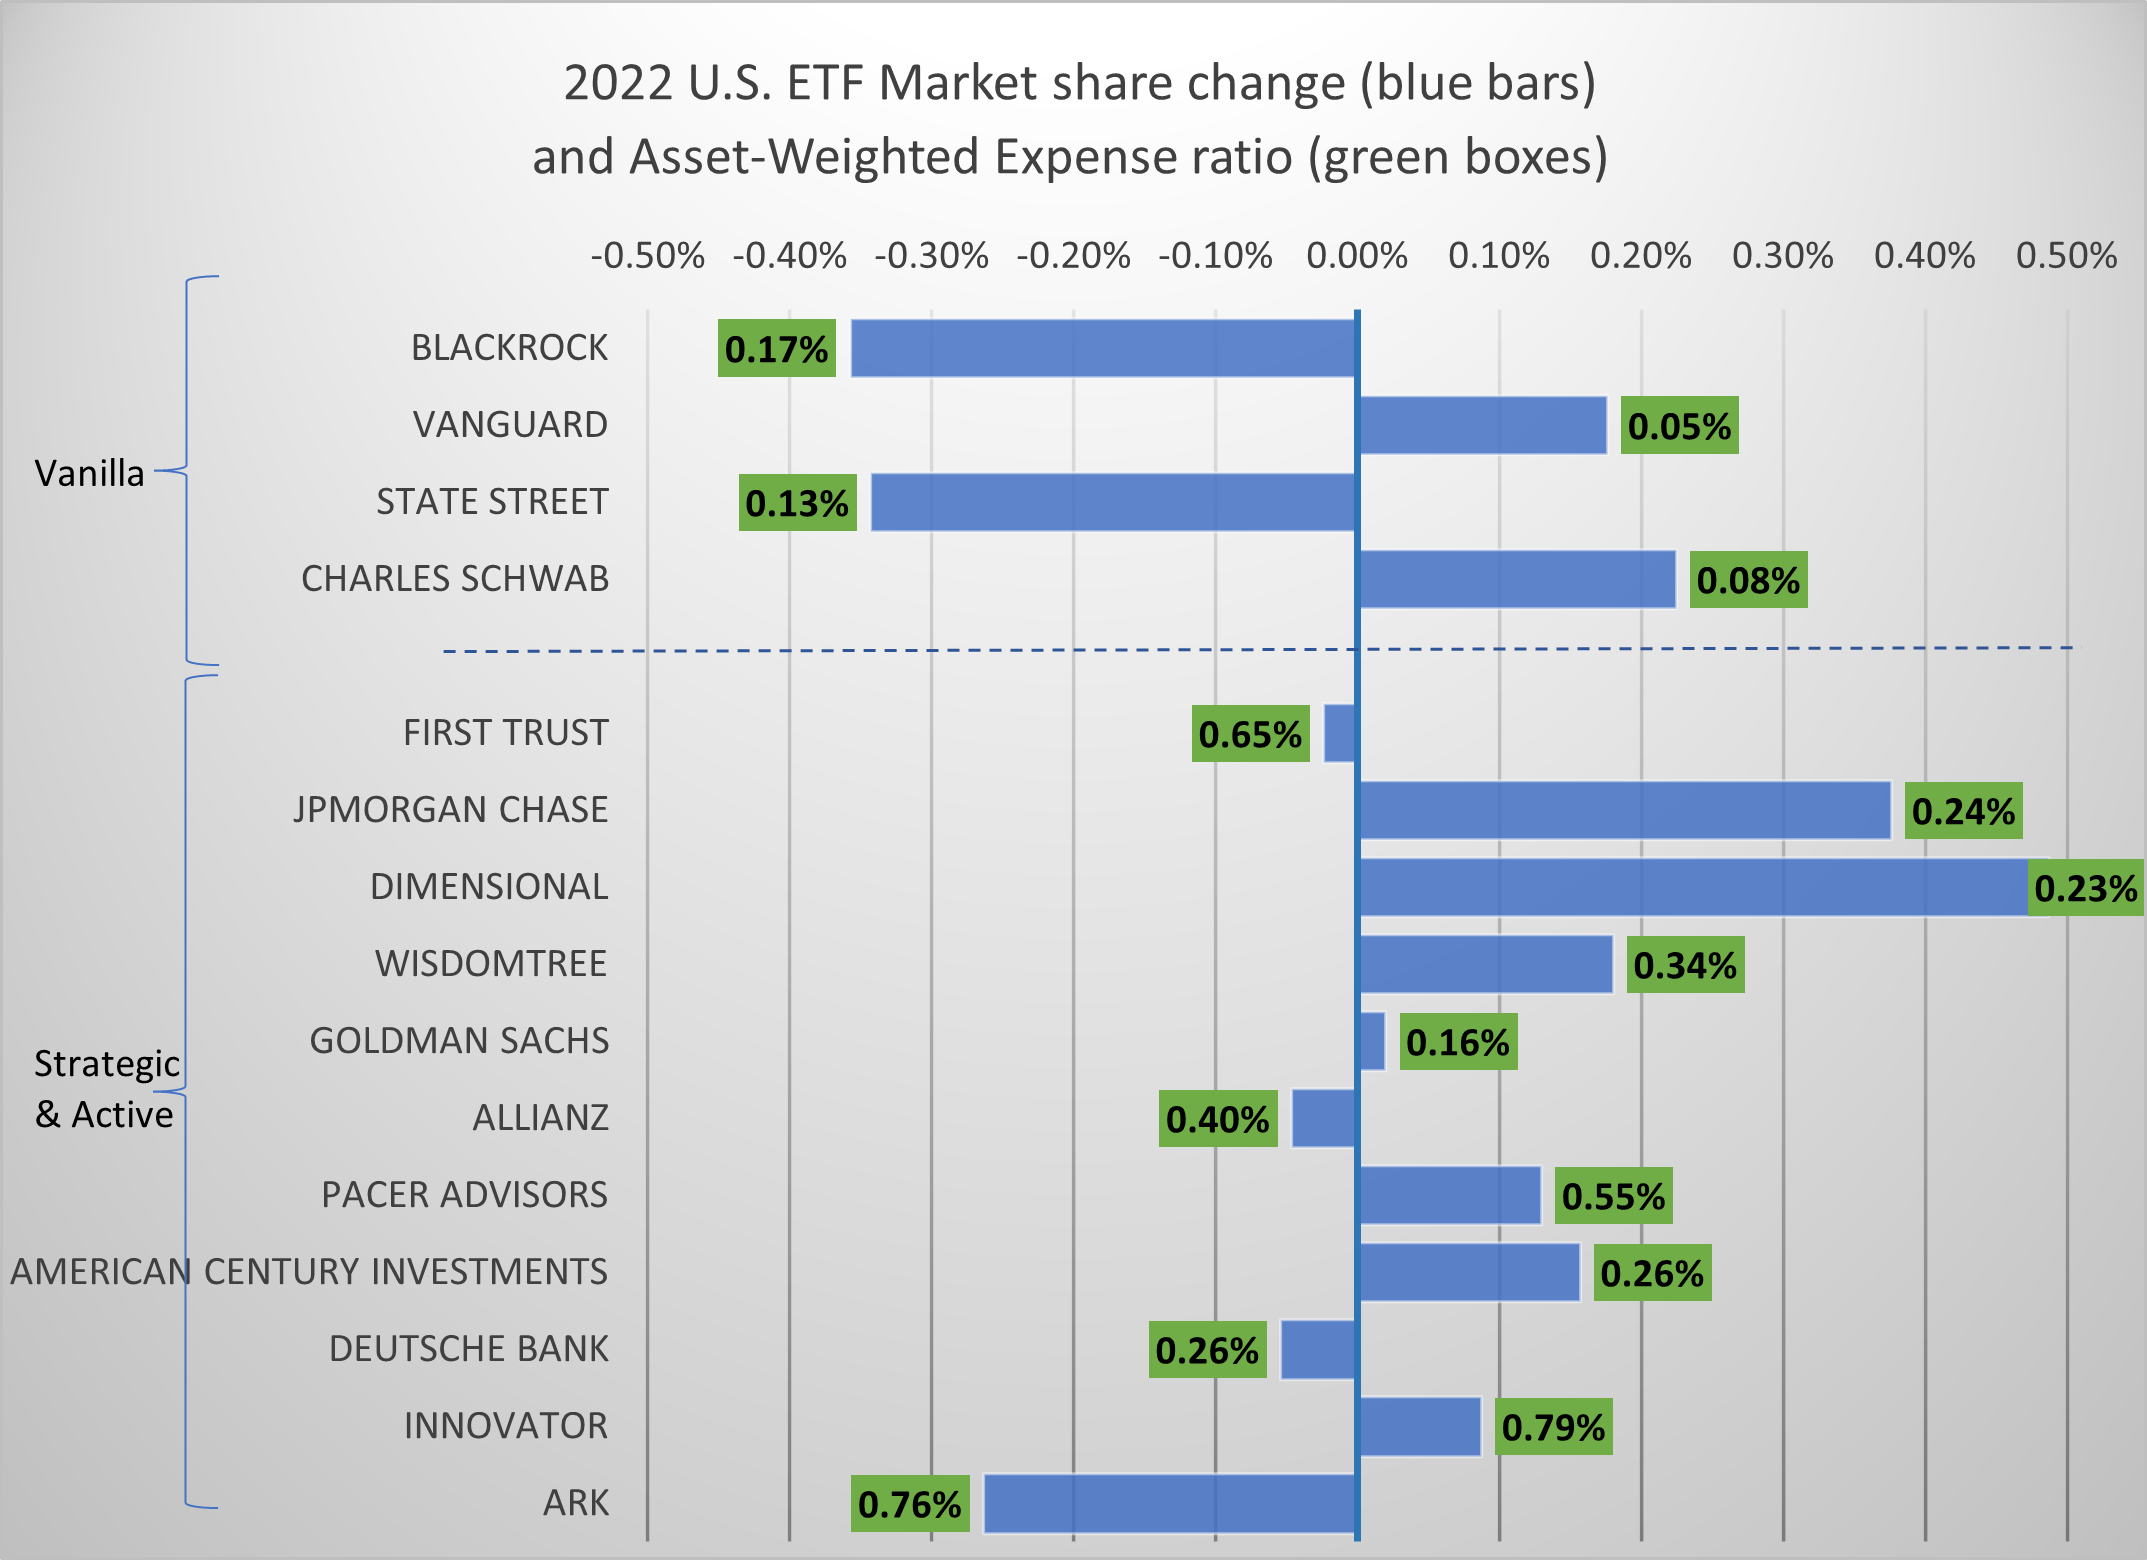 10-2022-us-etf-market-share-change-blue-bars-and-asset-weighted-expense-ratio-green-boxes